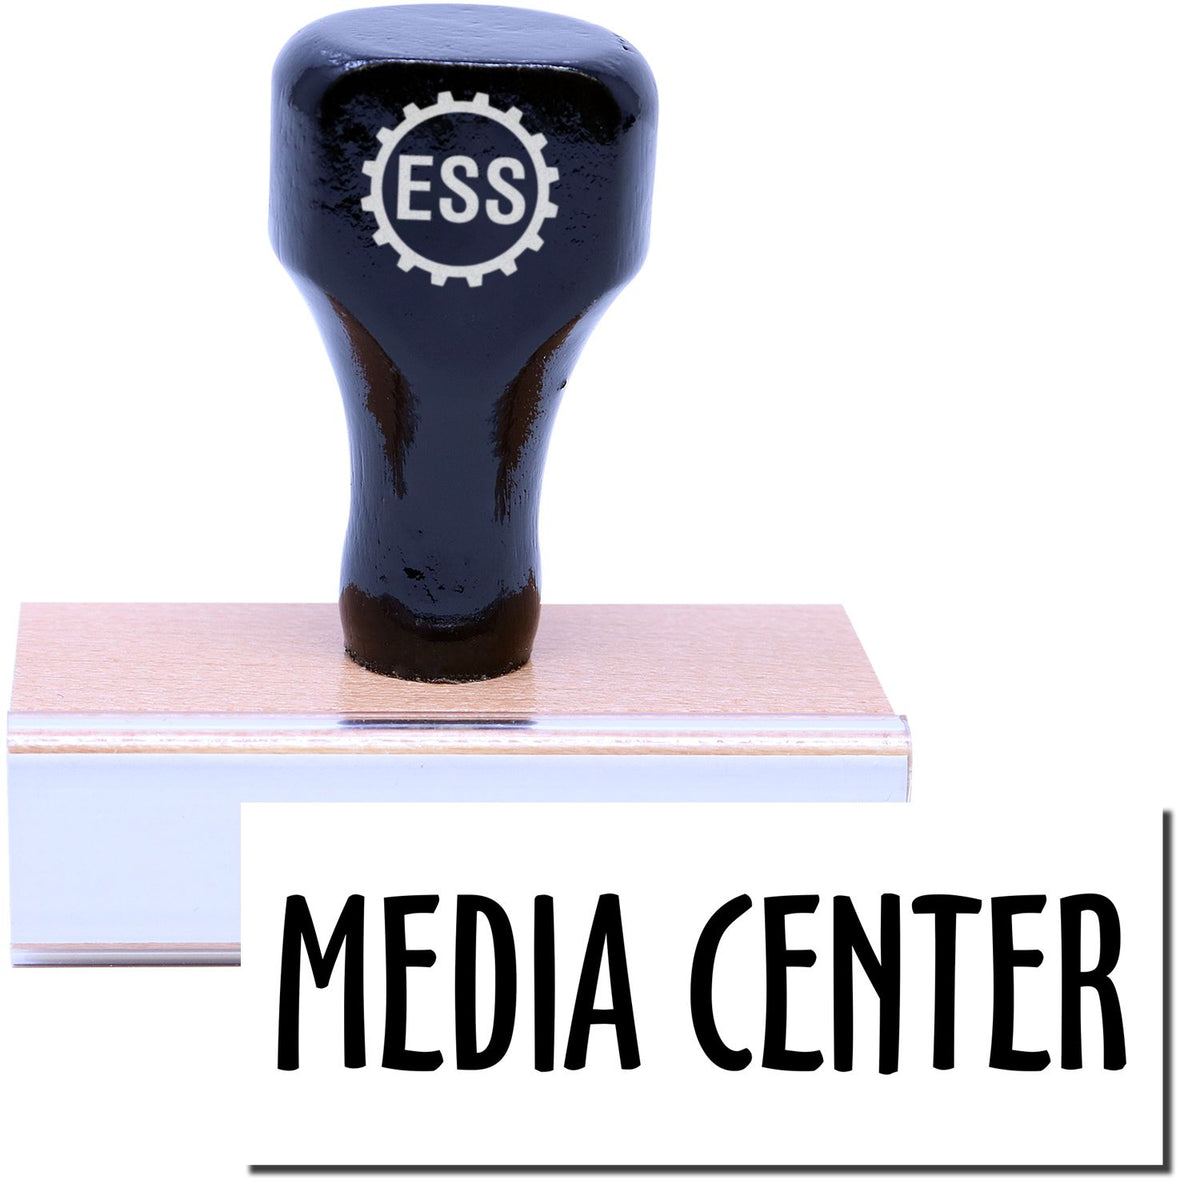 A stock office rubber stamp with a stamped image showing how the text &quot;MEDIA CENTER&quot; is displayed after stamping.